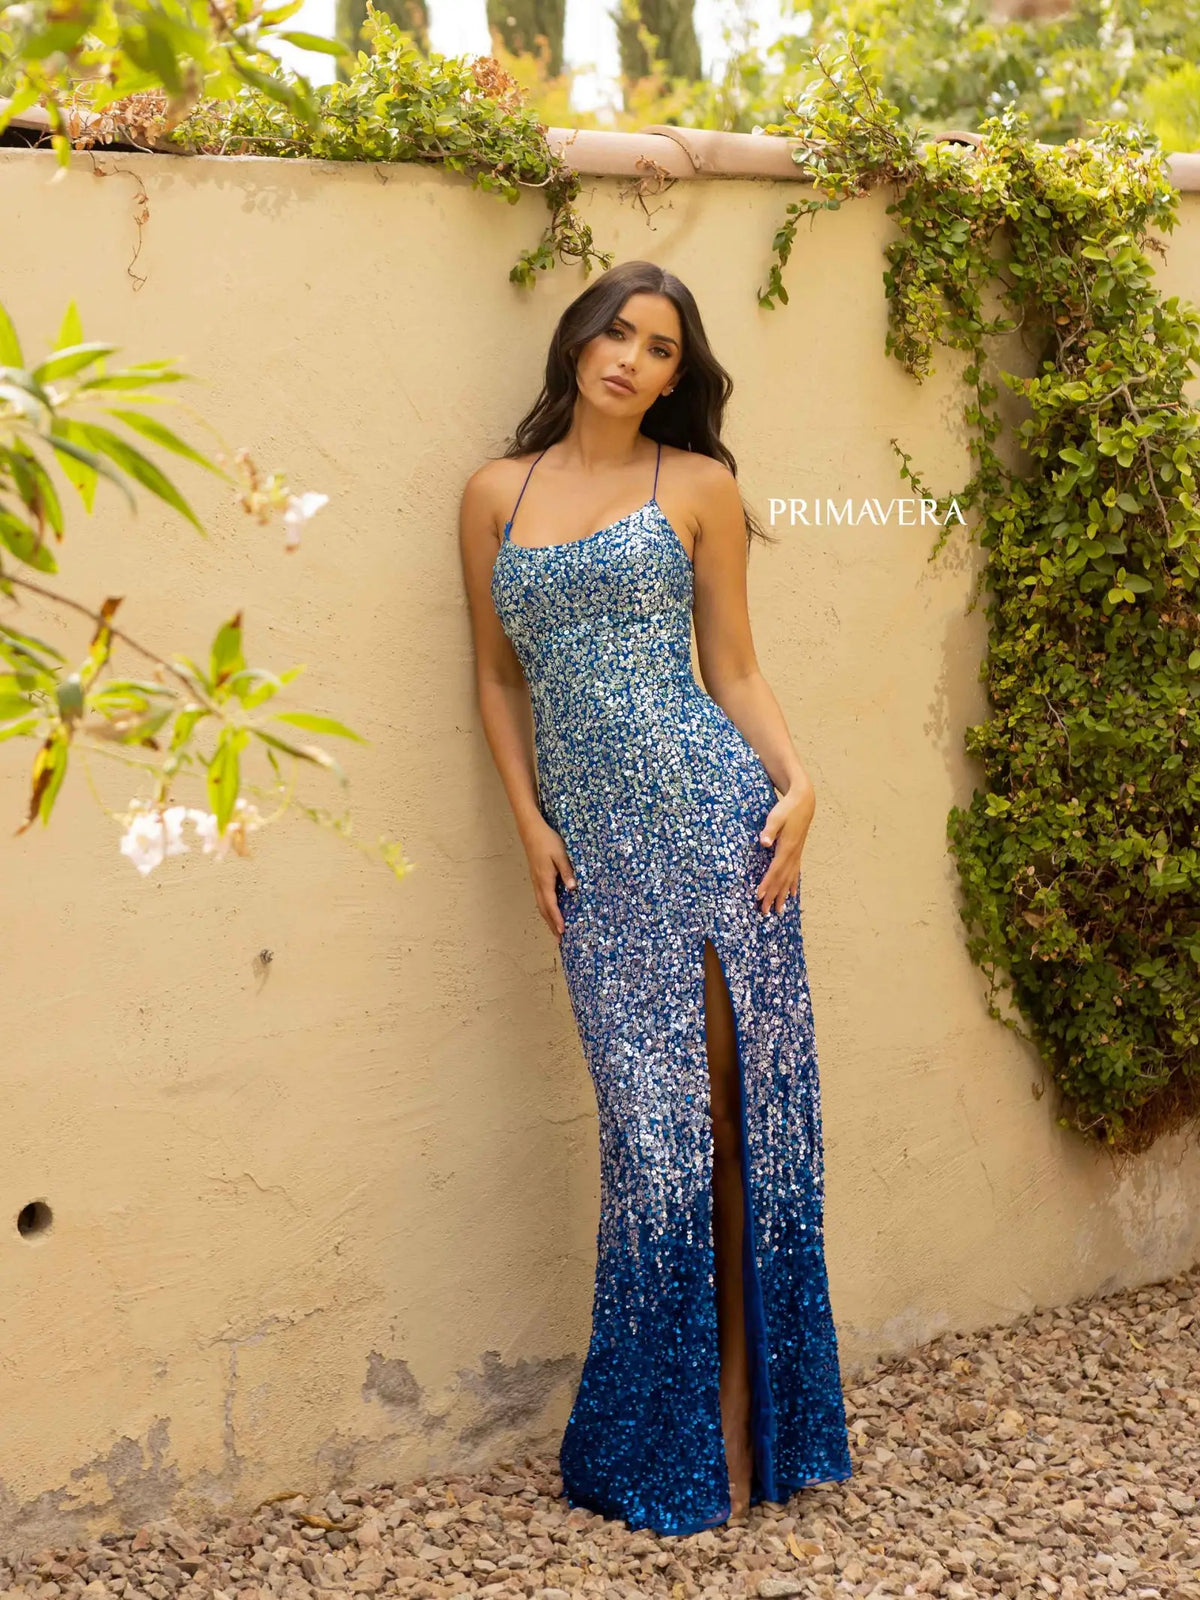 Get ready to shine at prom with this stunning blue sequin dress by Primavera, available at Madeline's Boutique in Toronto and Boca Raton. The fitted silhouette, low back, and strappy criss-cross detail add modern elegance and sexiness to this luxurious sequined gown